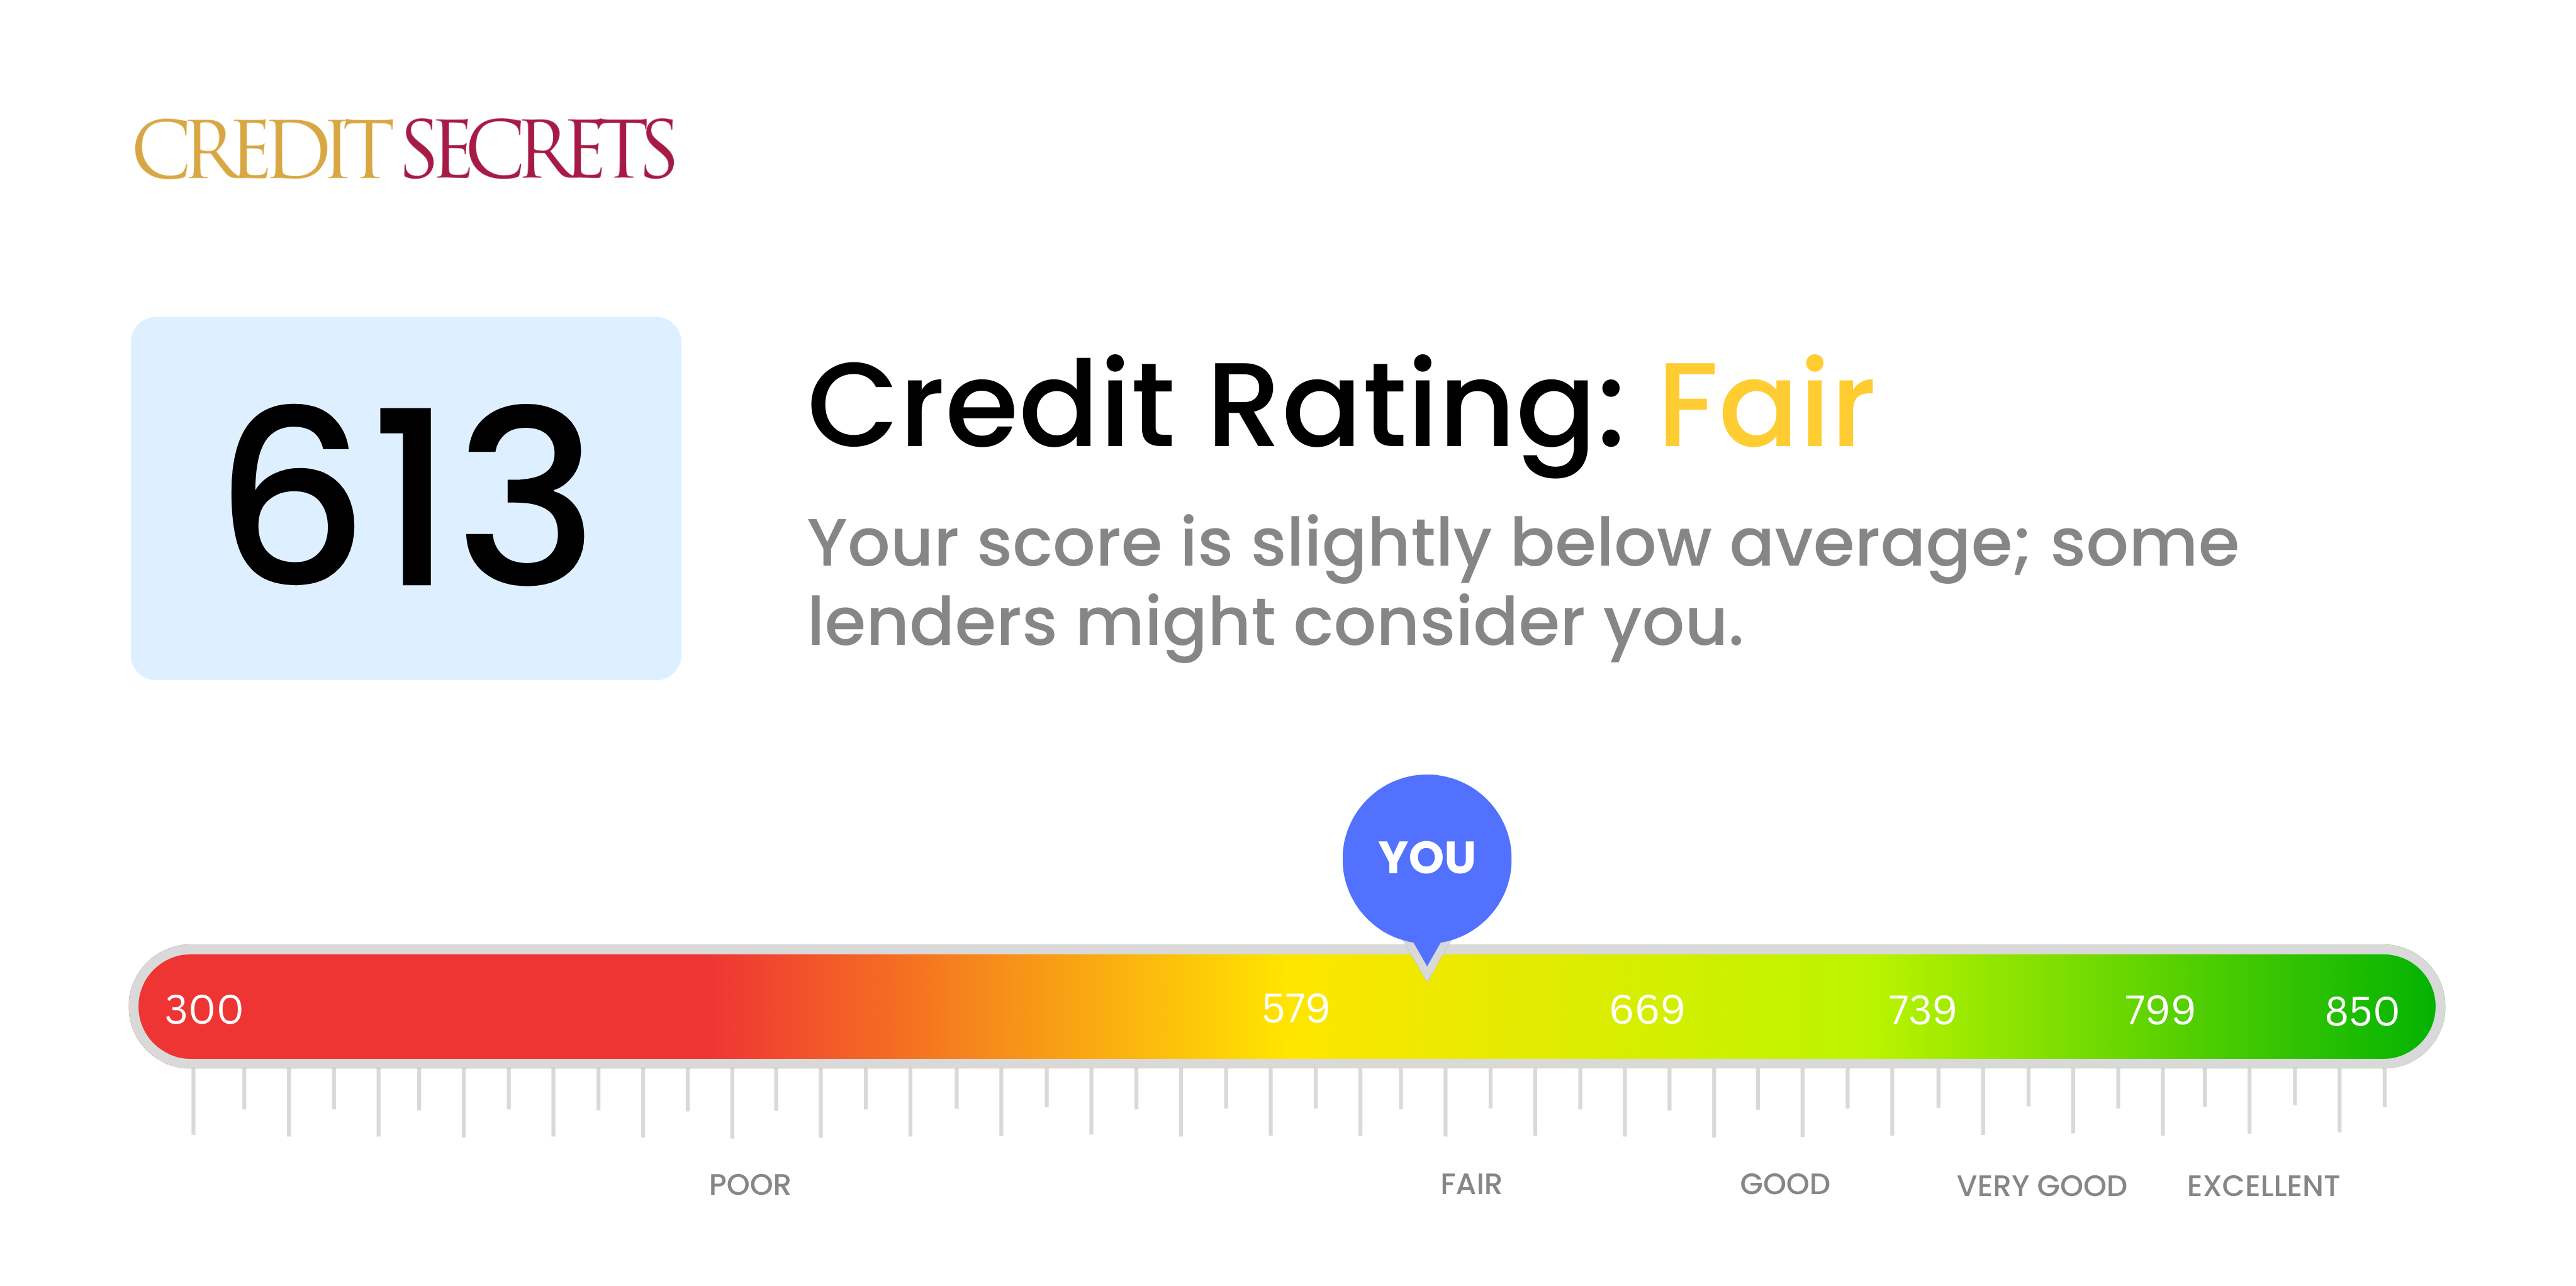 Is 613 a good credit score?